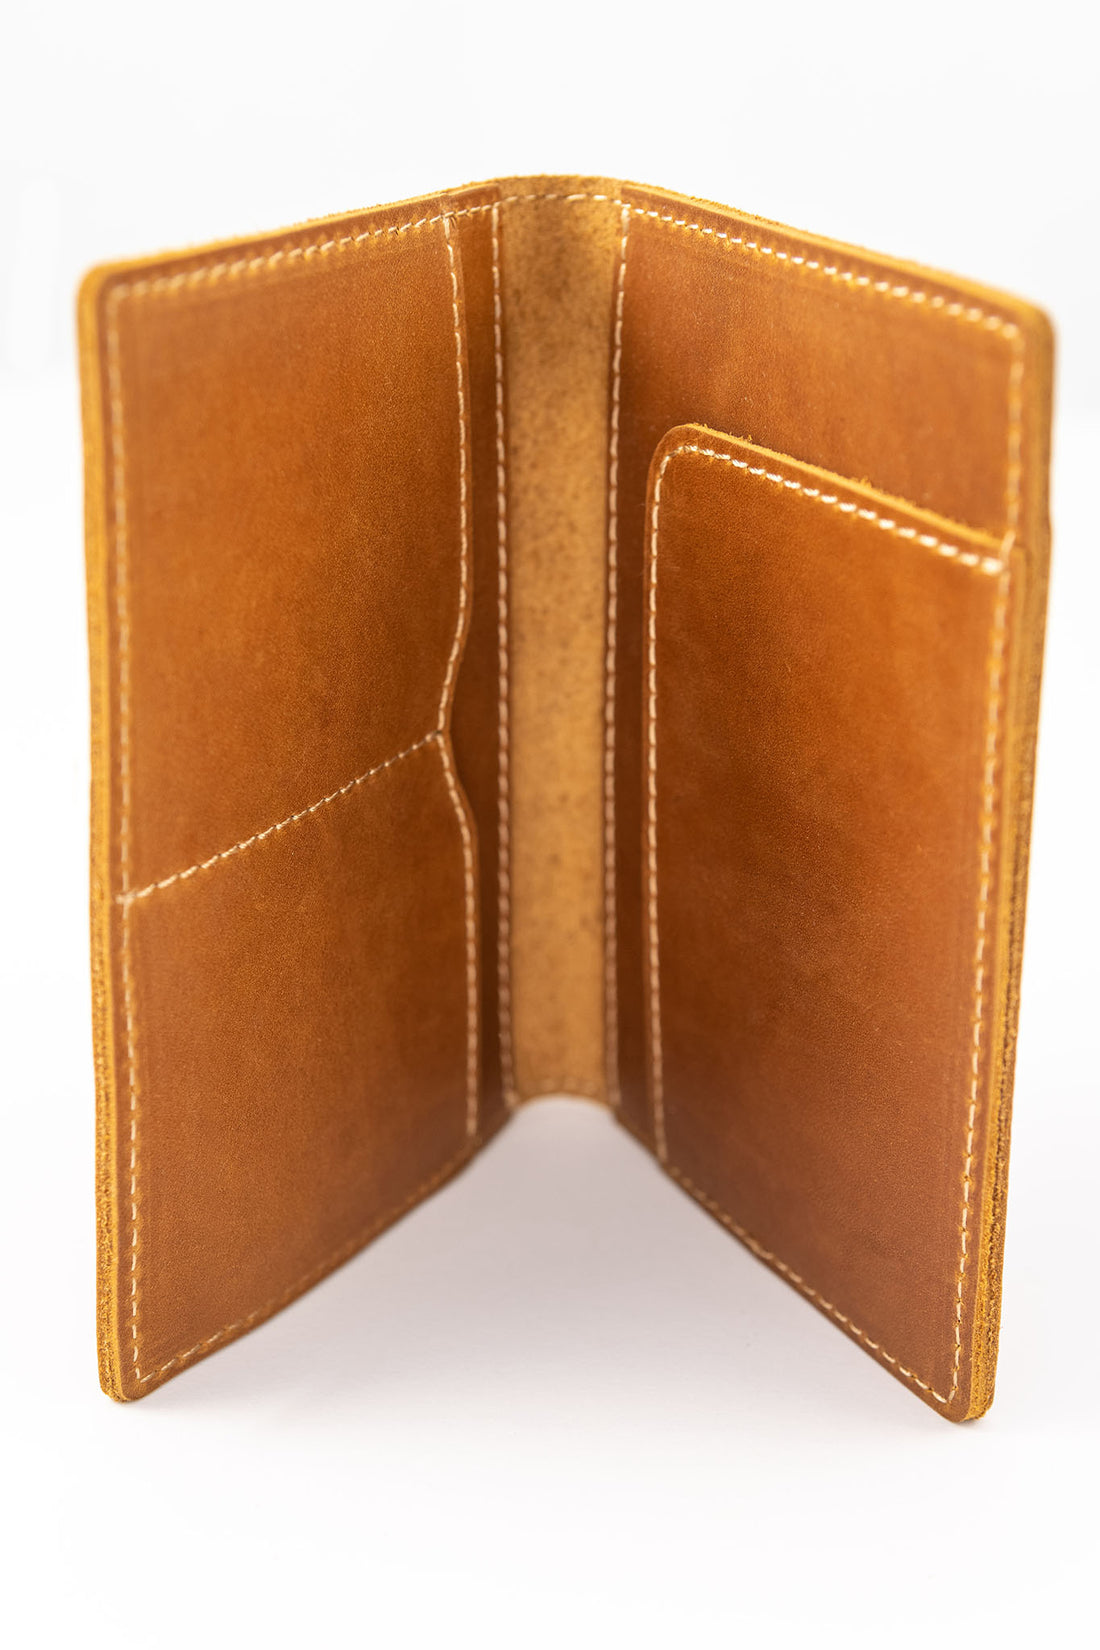 Handmade leather passport wallet made from genuine leather showing internal pockets and tan stitching